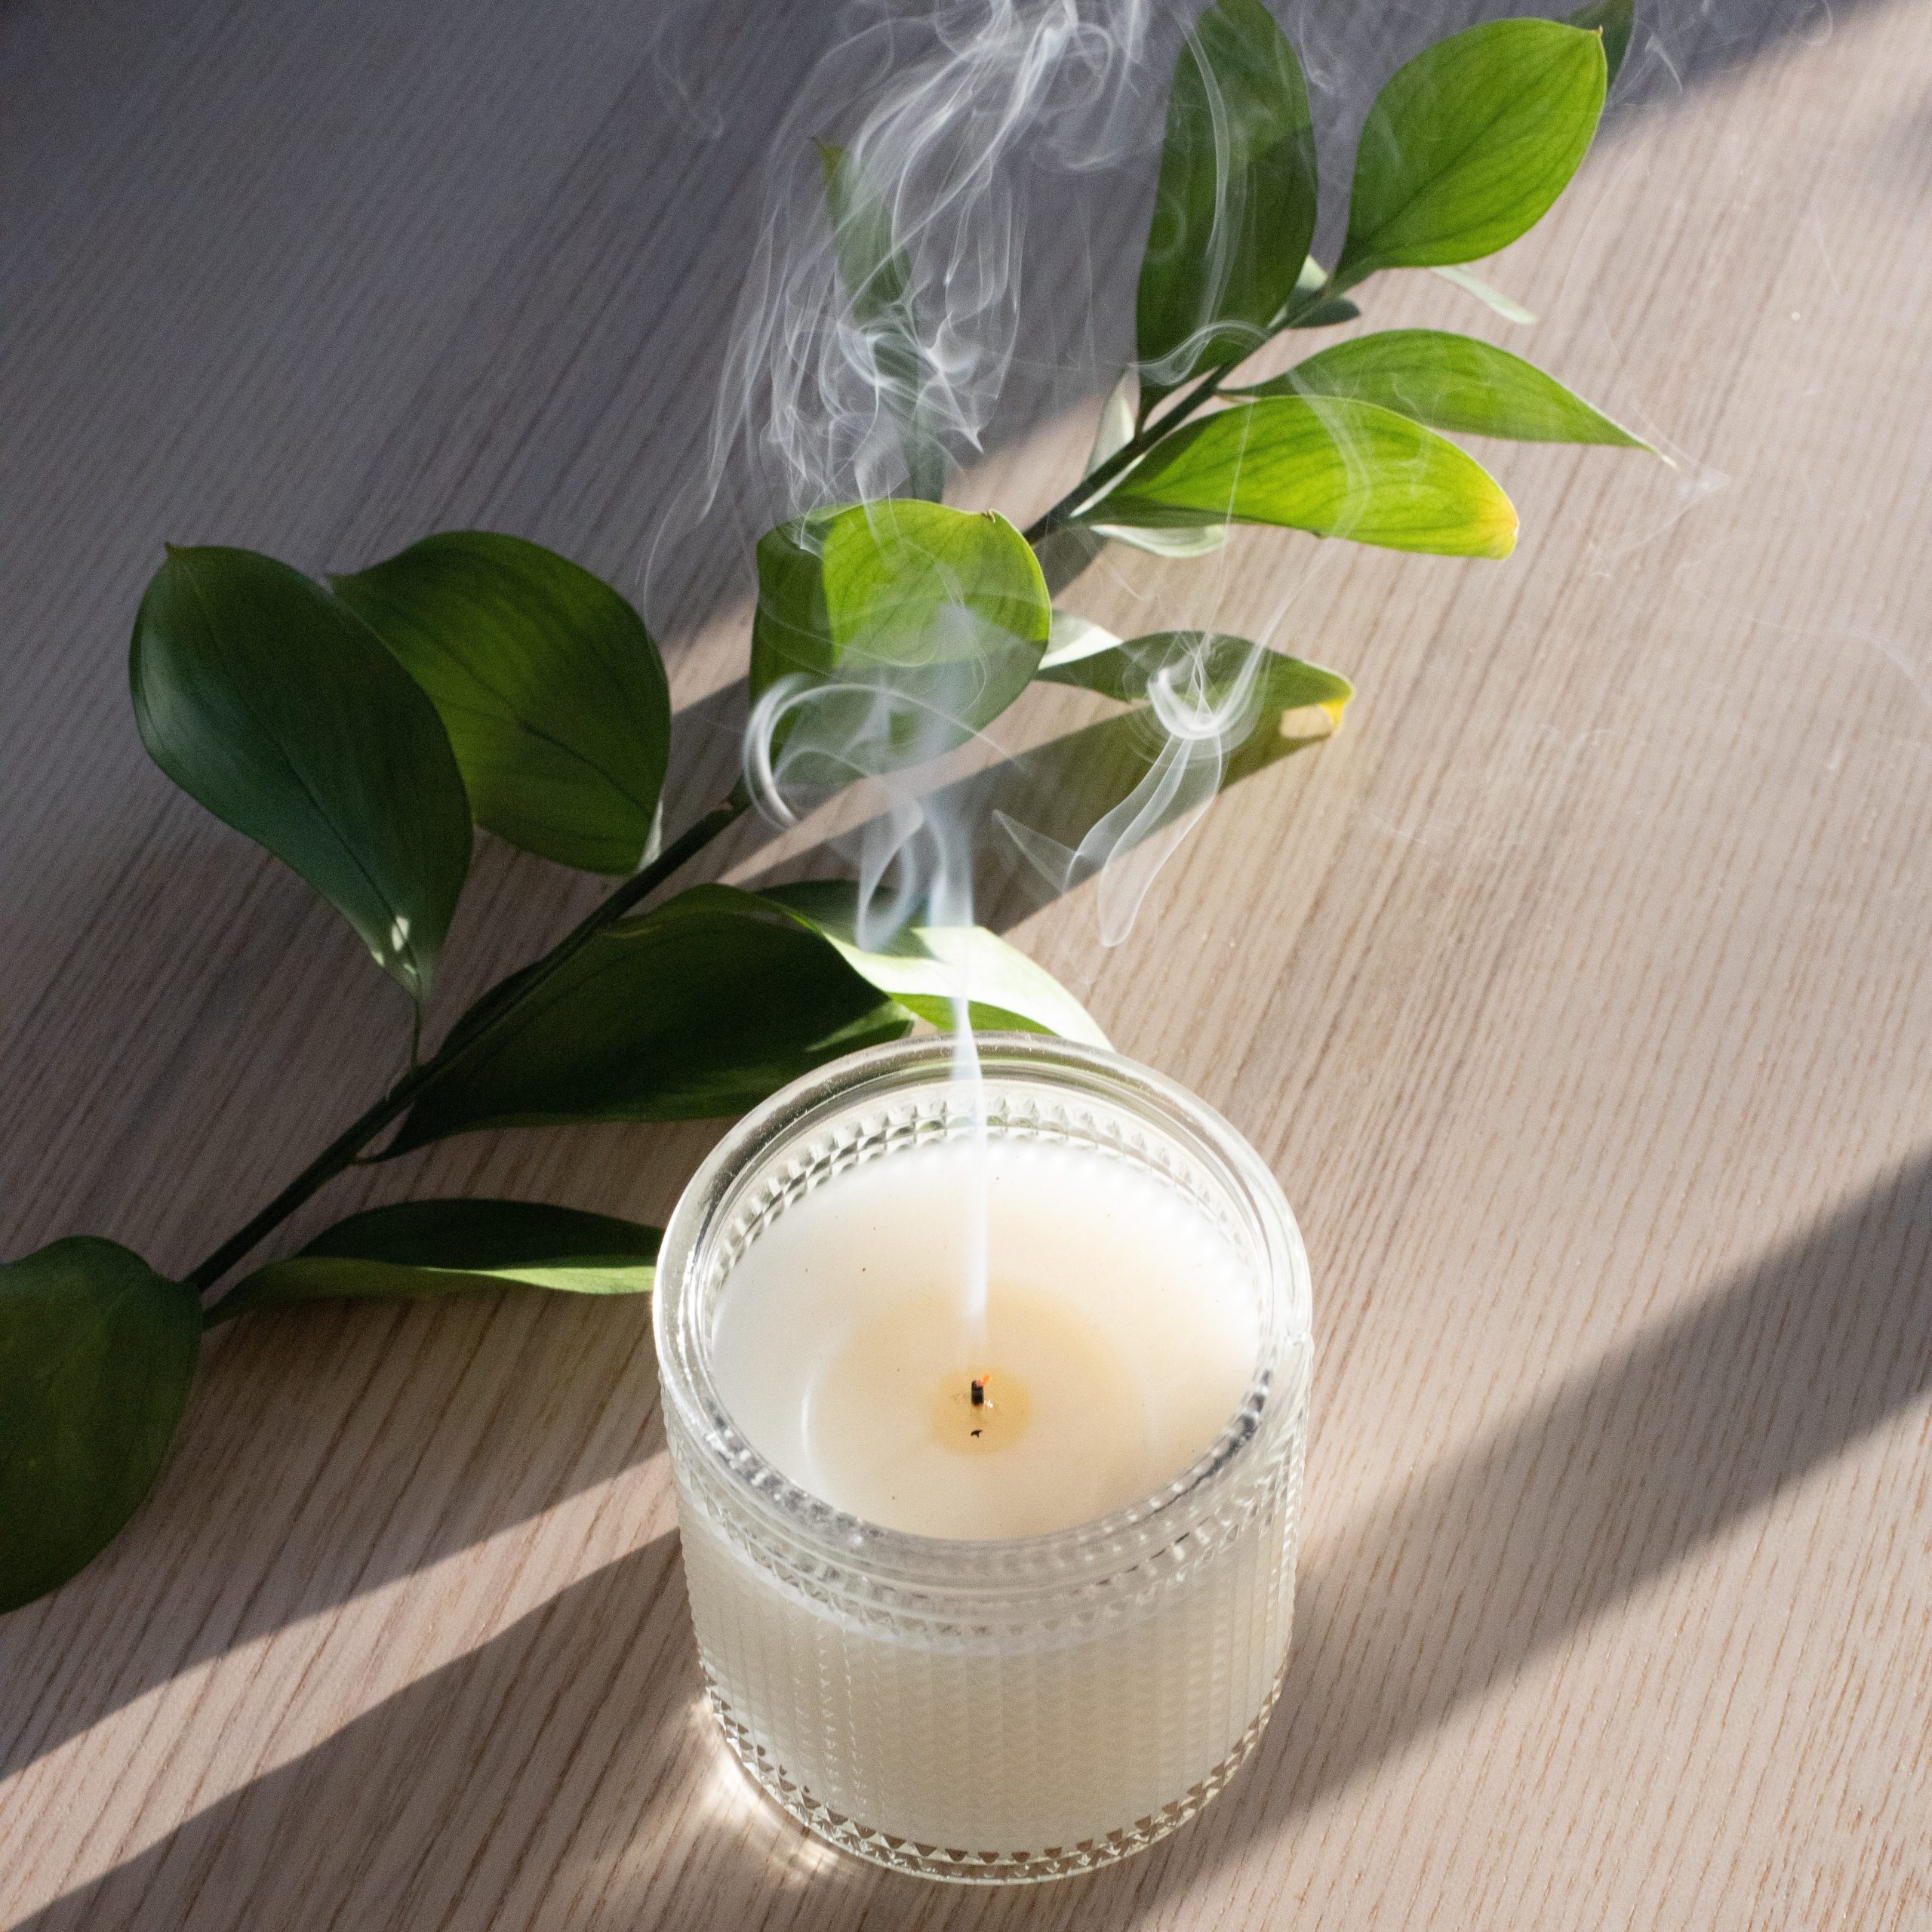 Scented candles contain indoor pollutants that can create toxic households.